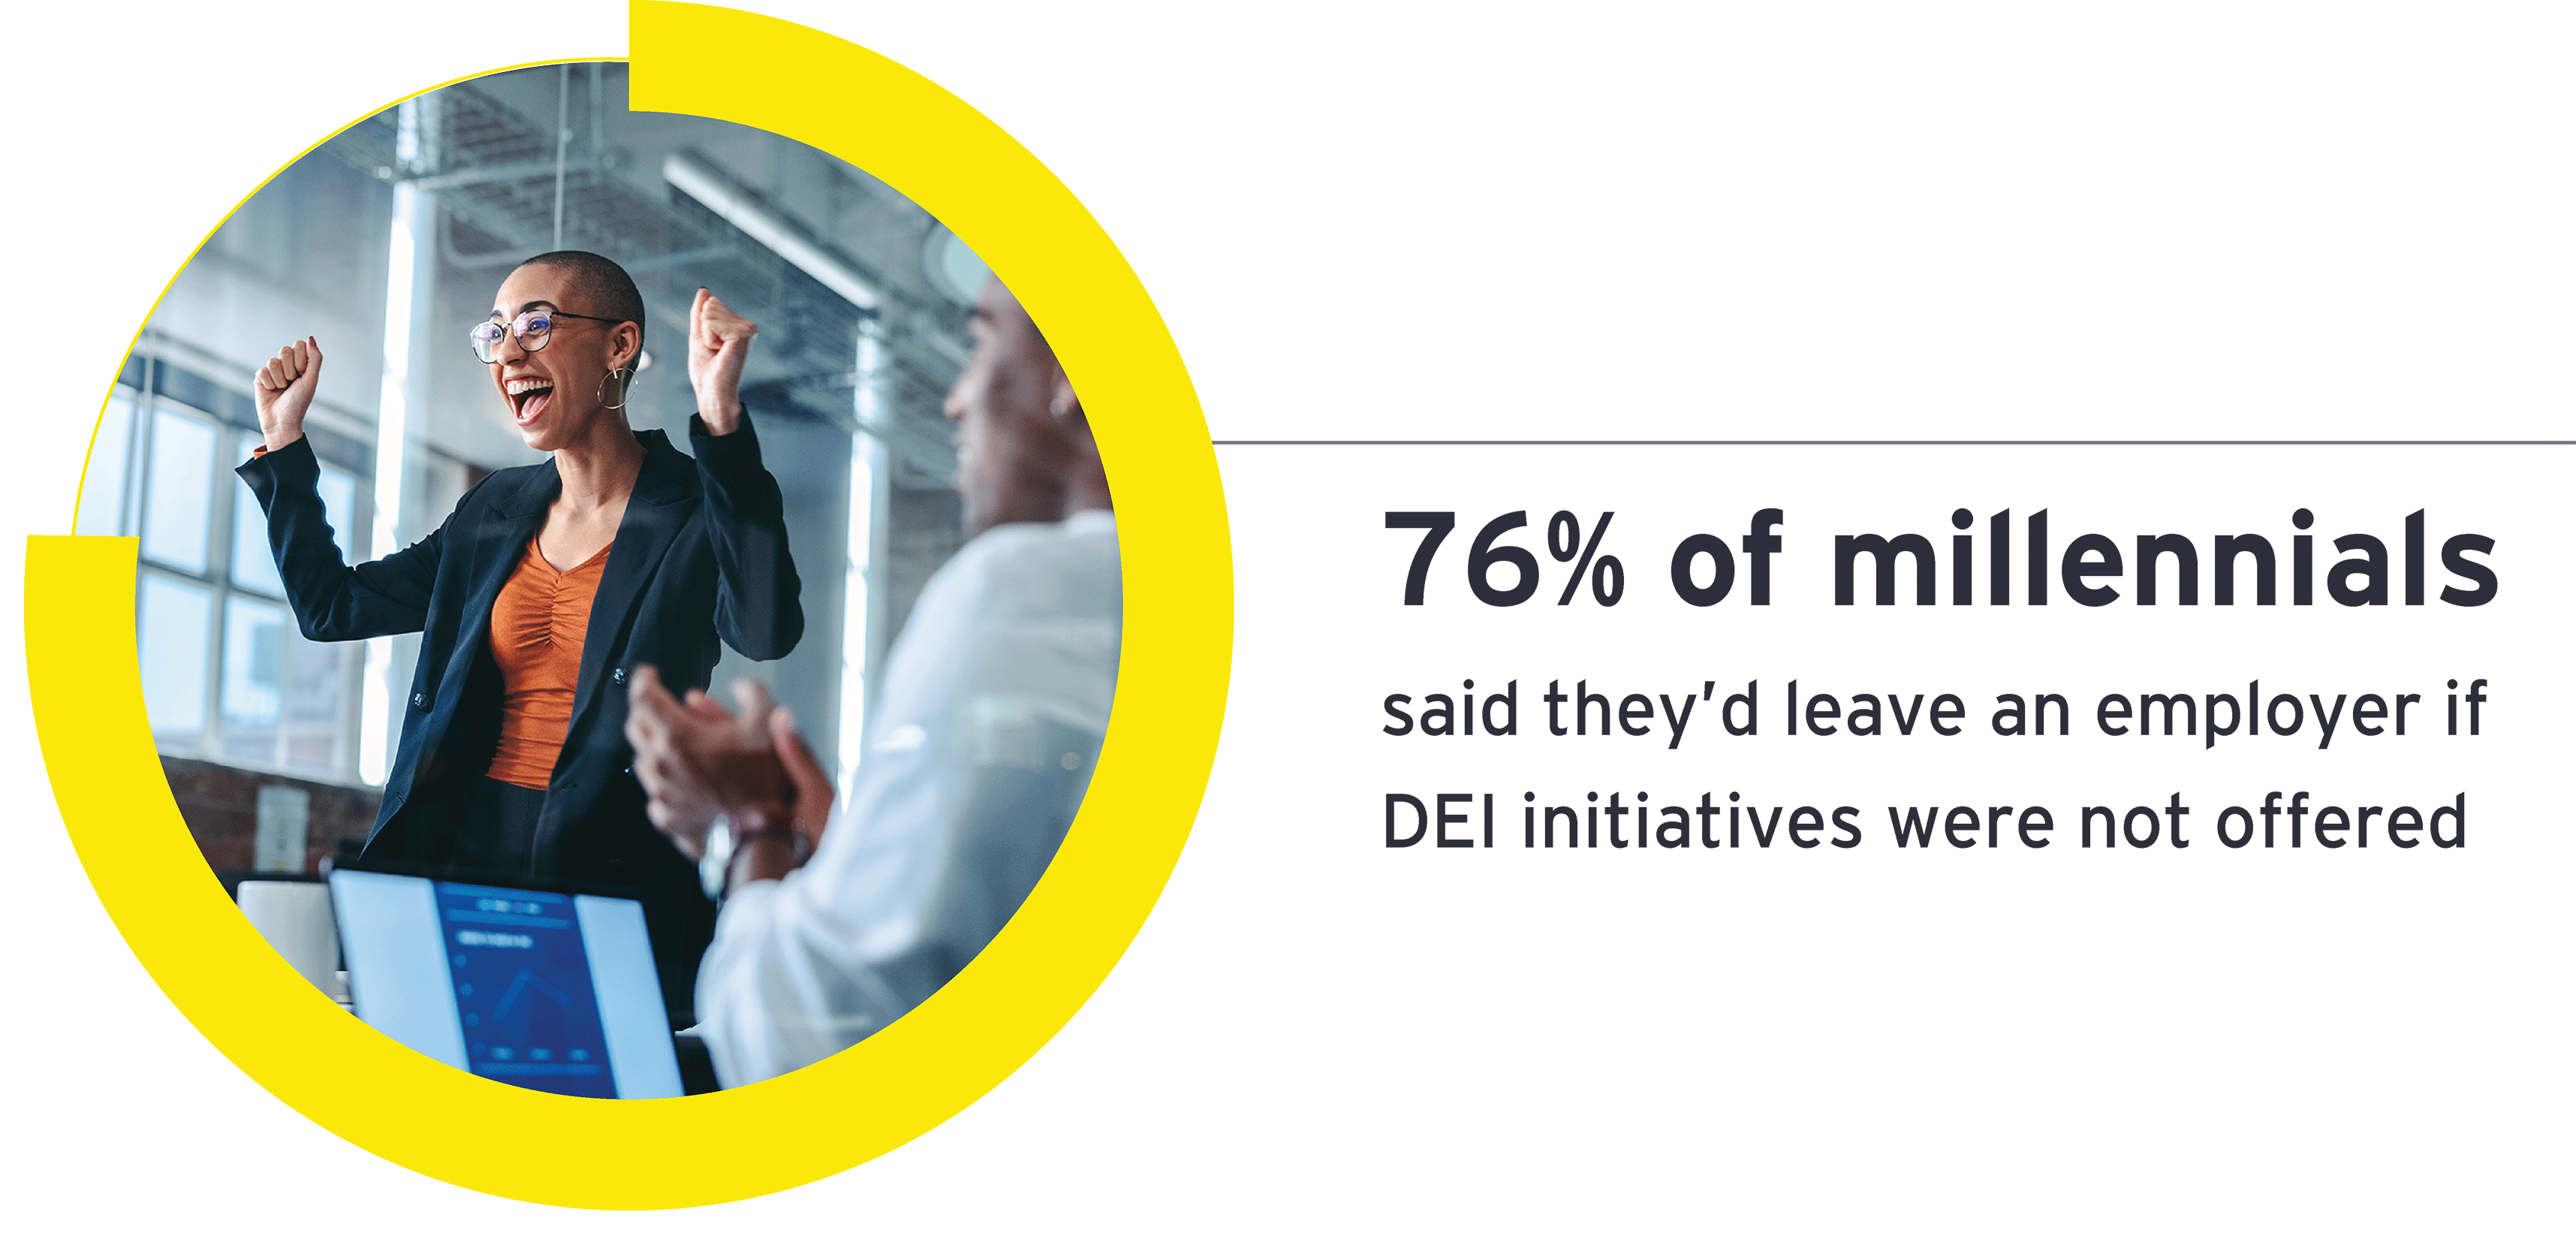 76% of millennials said they’d leave an employer if DEI initiatives were not offered